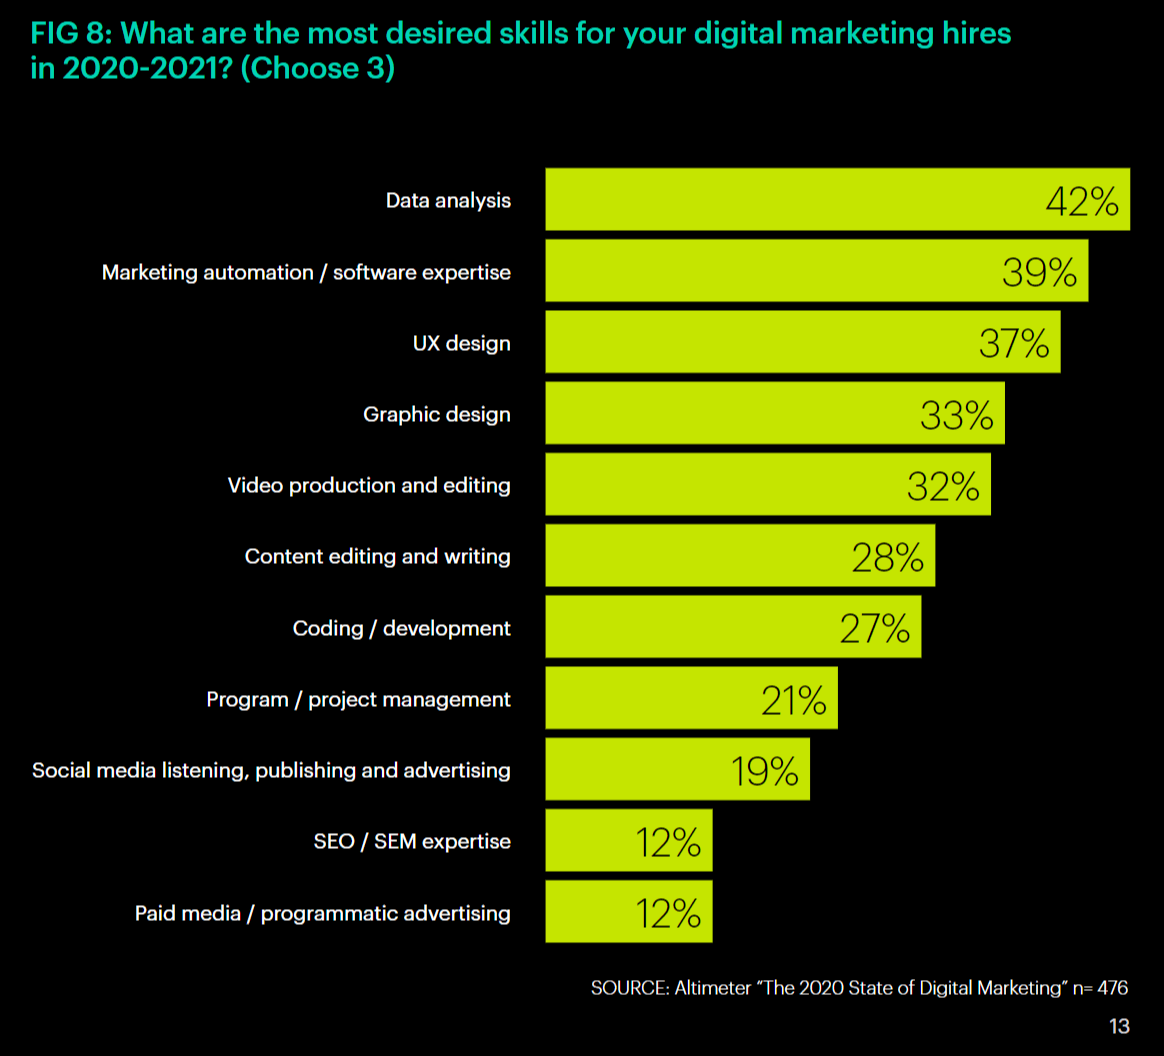 Data analysis is the most desired marketing skill, according to a study from Altimeter